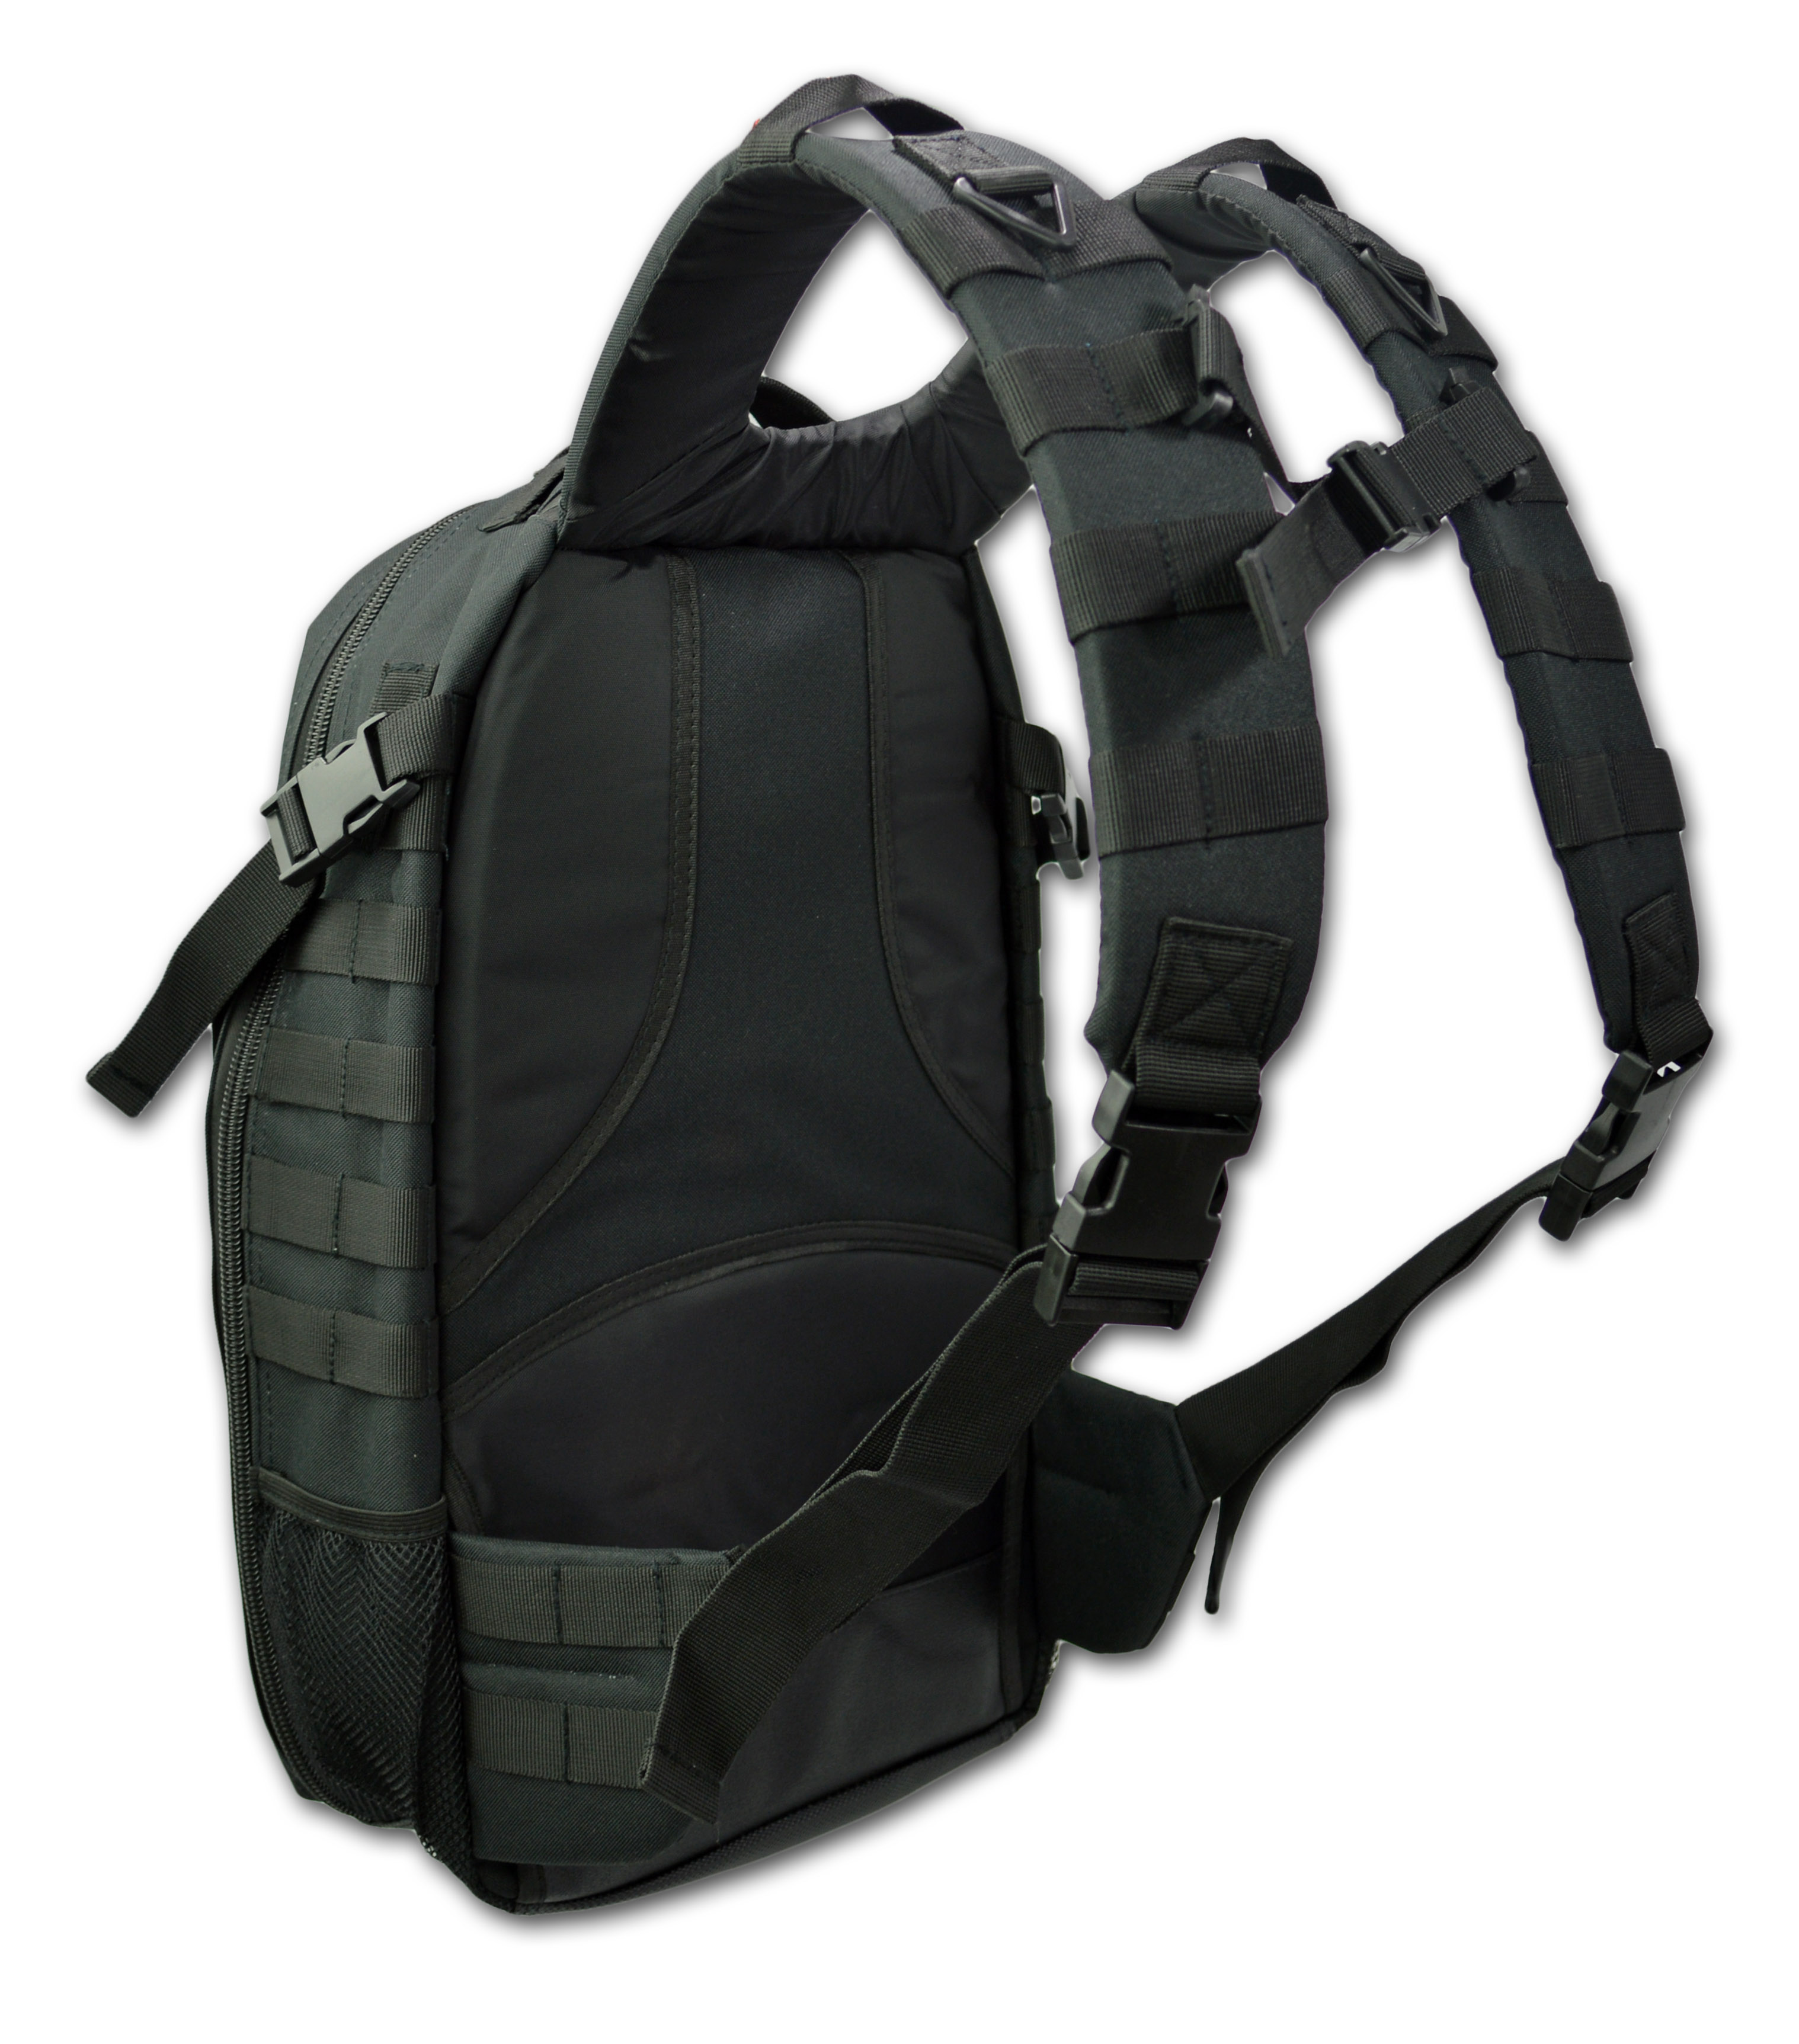 Lightning X Premium Tactical Medic Backpack w/ Modular Pouches & Hydration Port - image 3 of 3